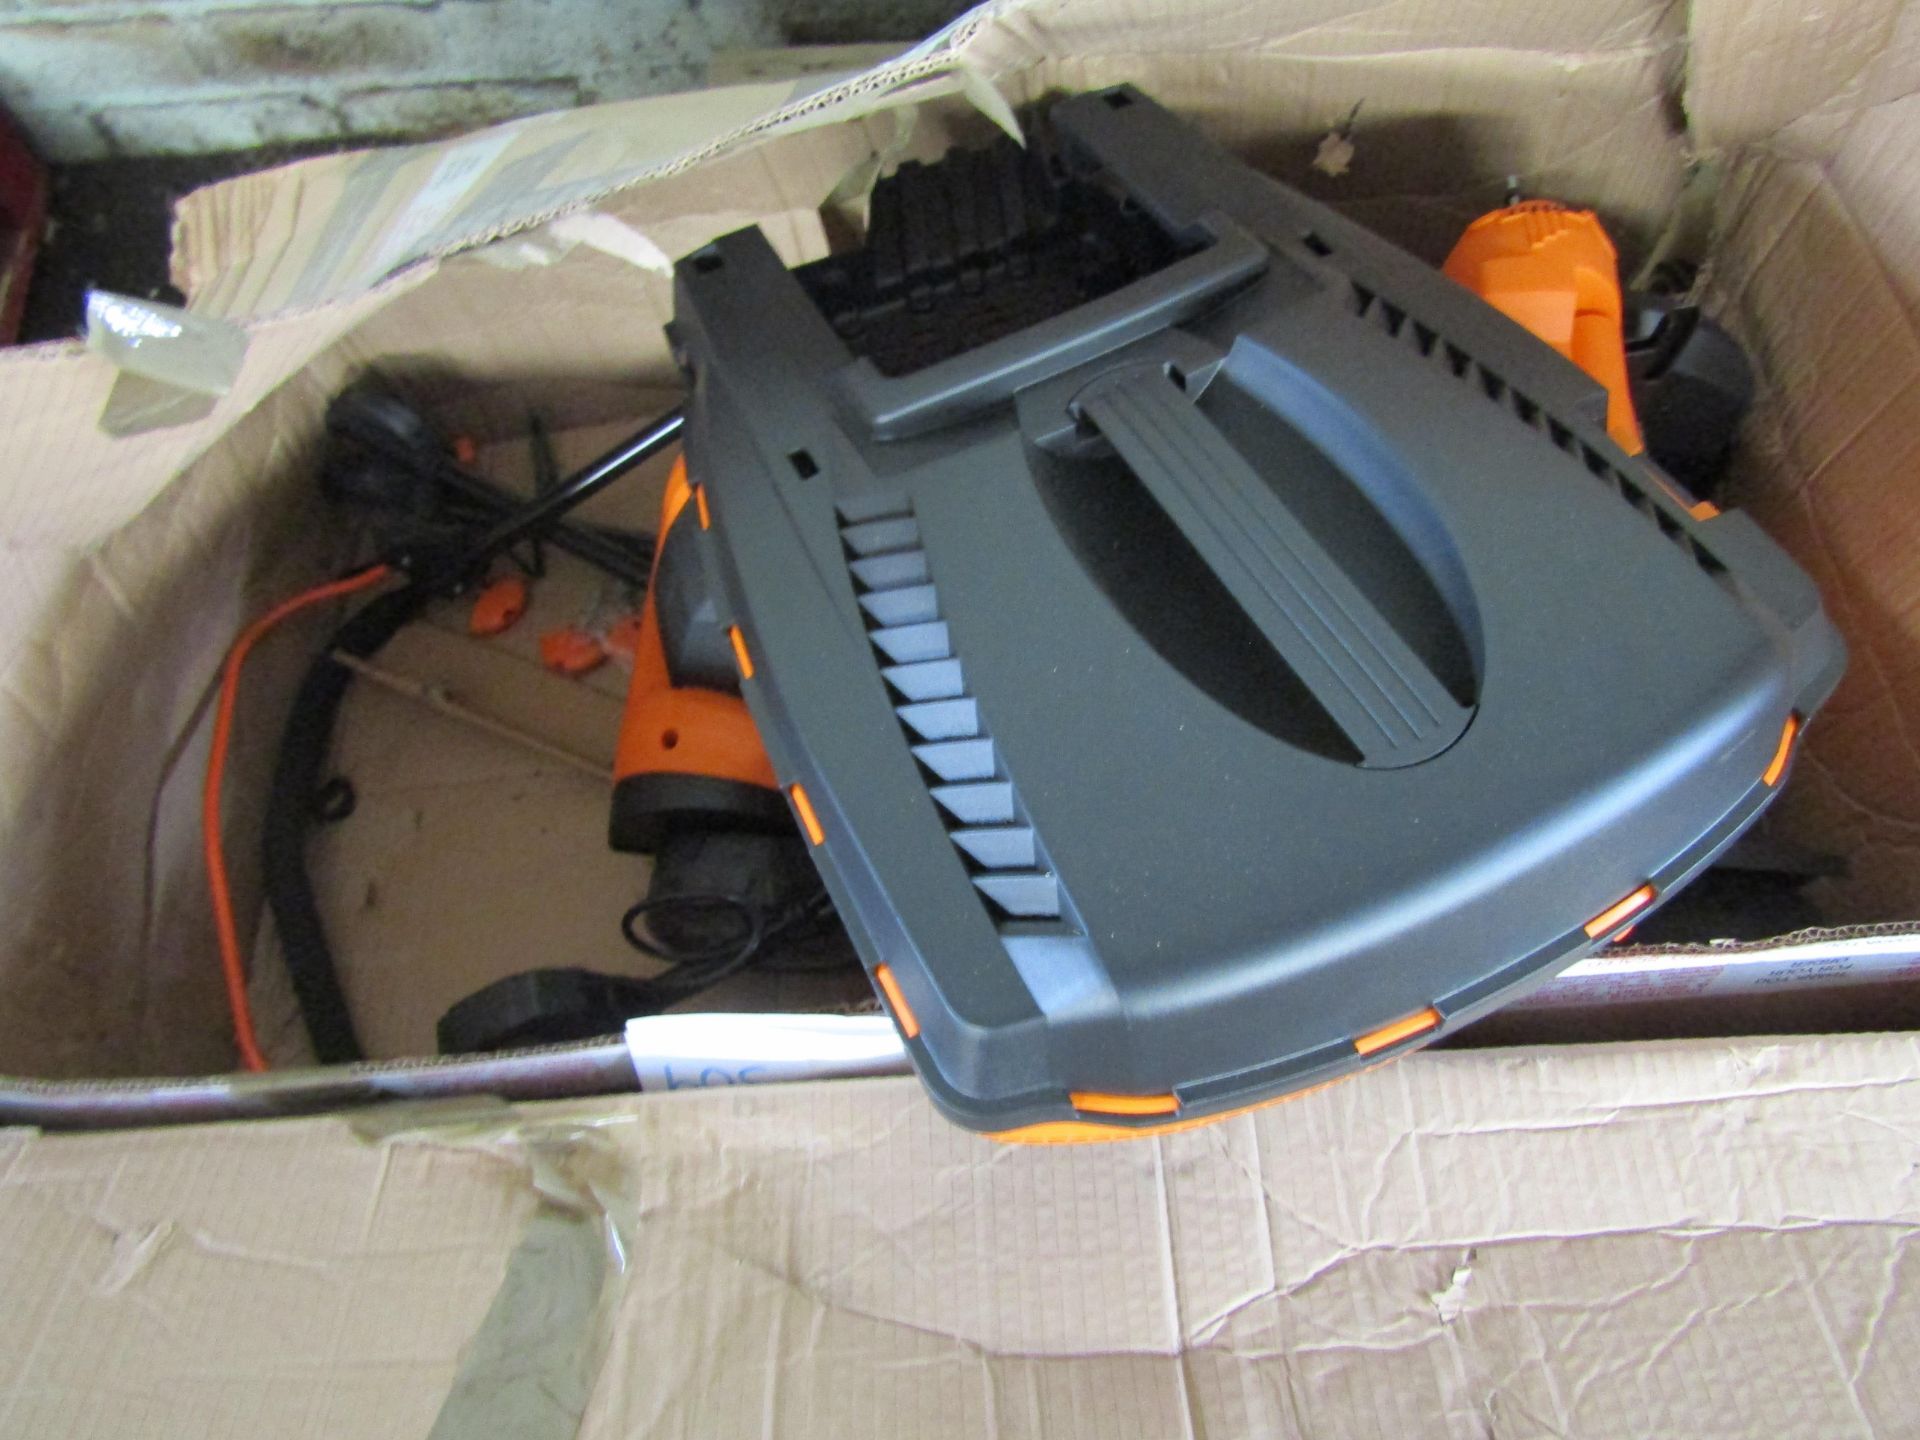 Lawn master 24V cordless lawn mower, missing charger and batteries.